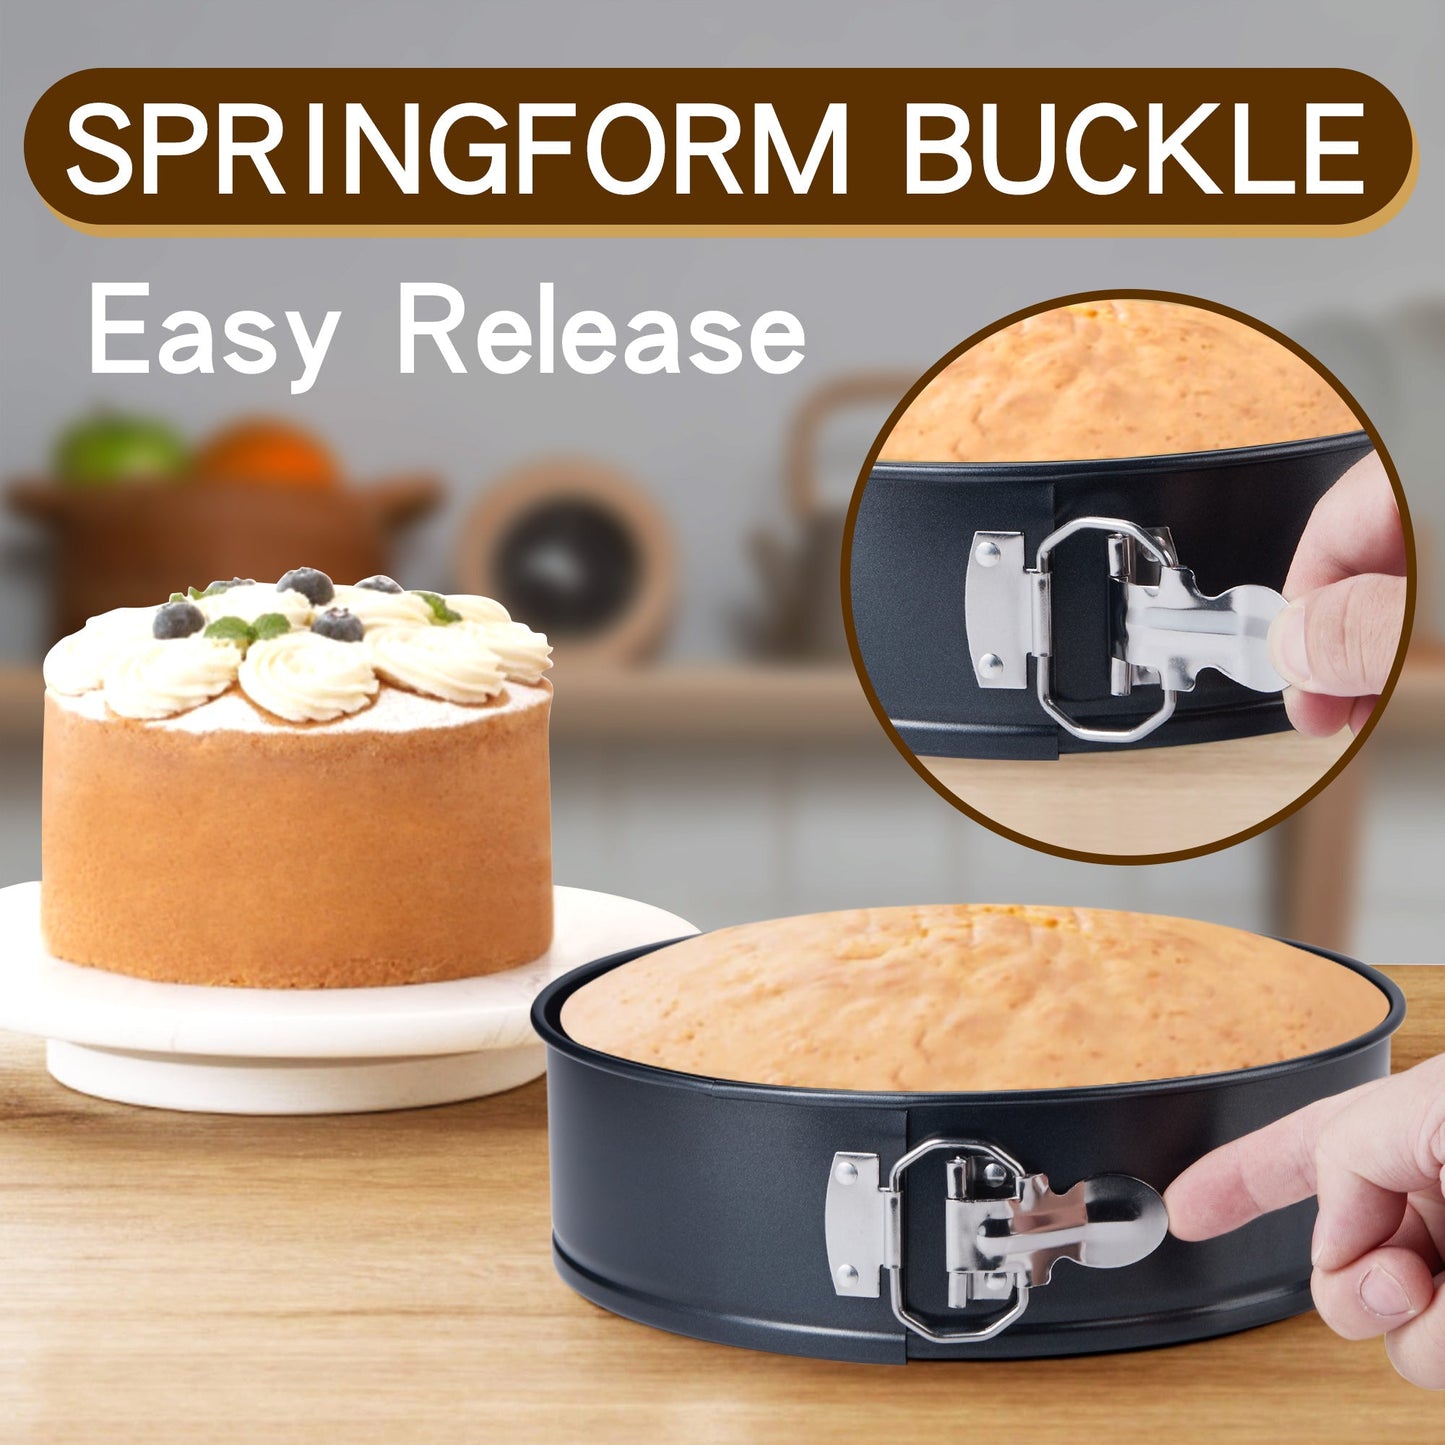 Springform Baking Pan With Grips, Springform Pan Set, Nonstick and Leak-proof 4 Pieces (4 Inch/7 Inch/9 Inch/10 Inch) Cake Pan/Springform Cake Tin/Cheesecake Pan Set with Removable Bottom